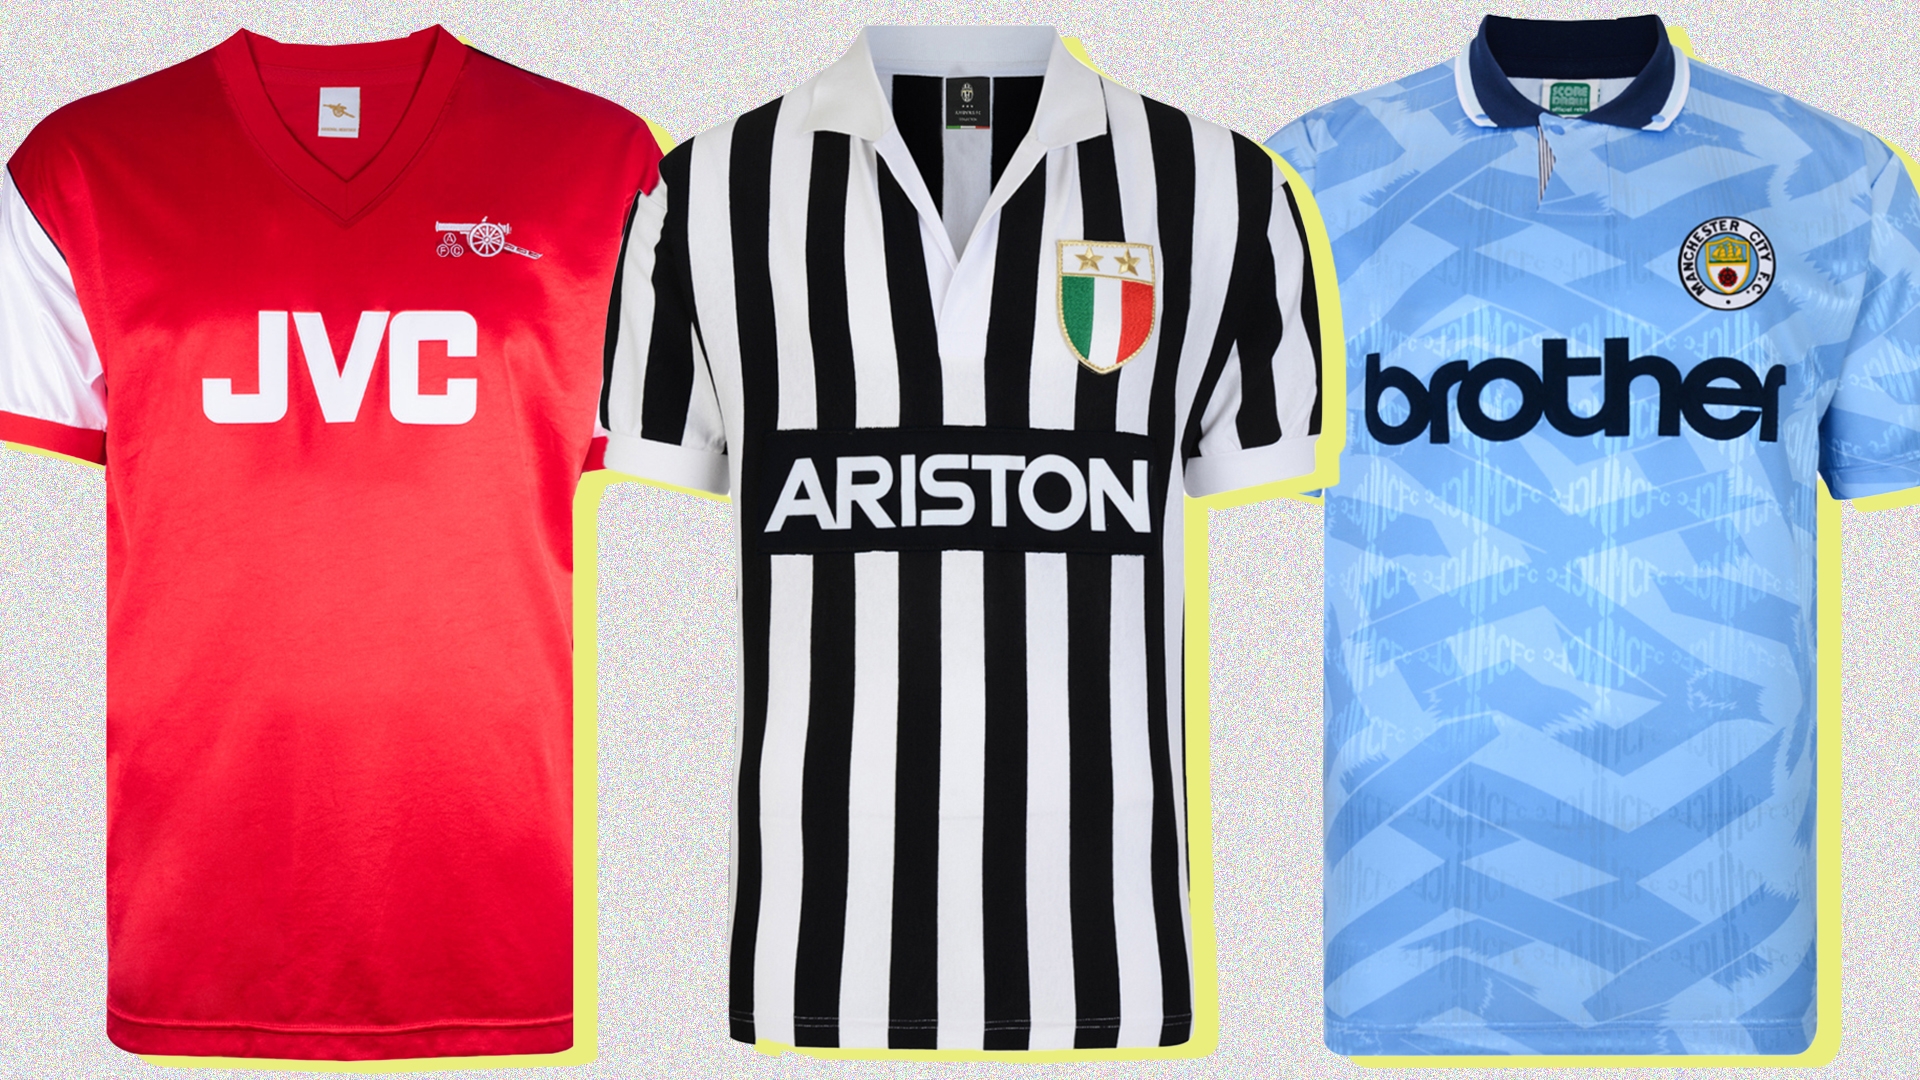 Retro football shirts: Best jerseys & how much they cost to buy | Goal.com